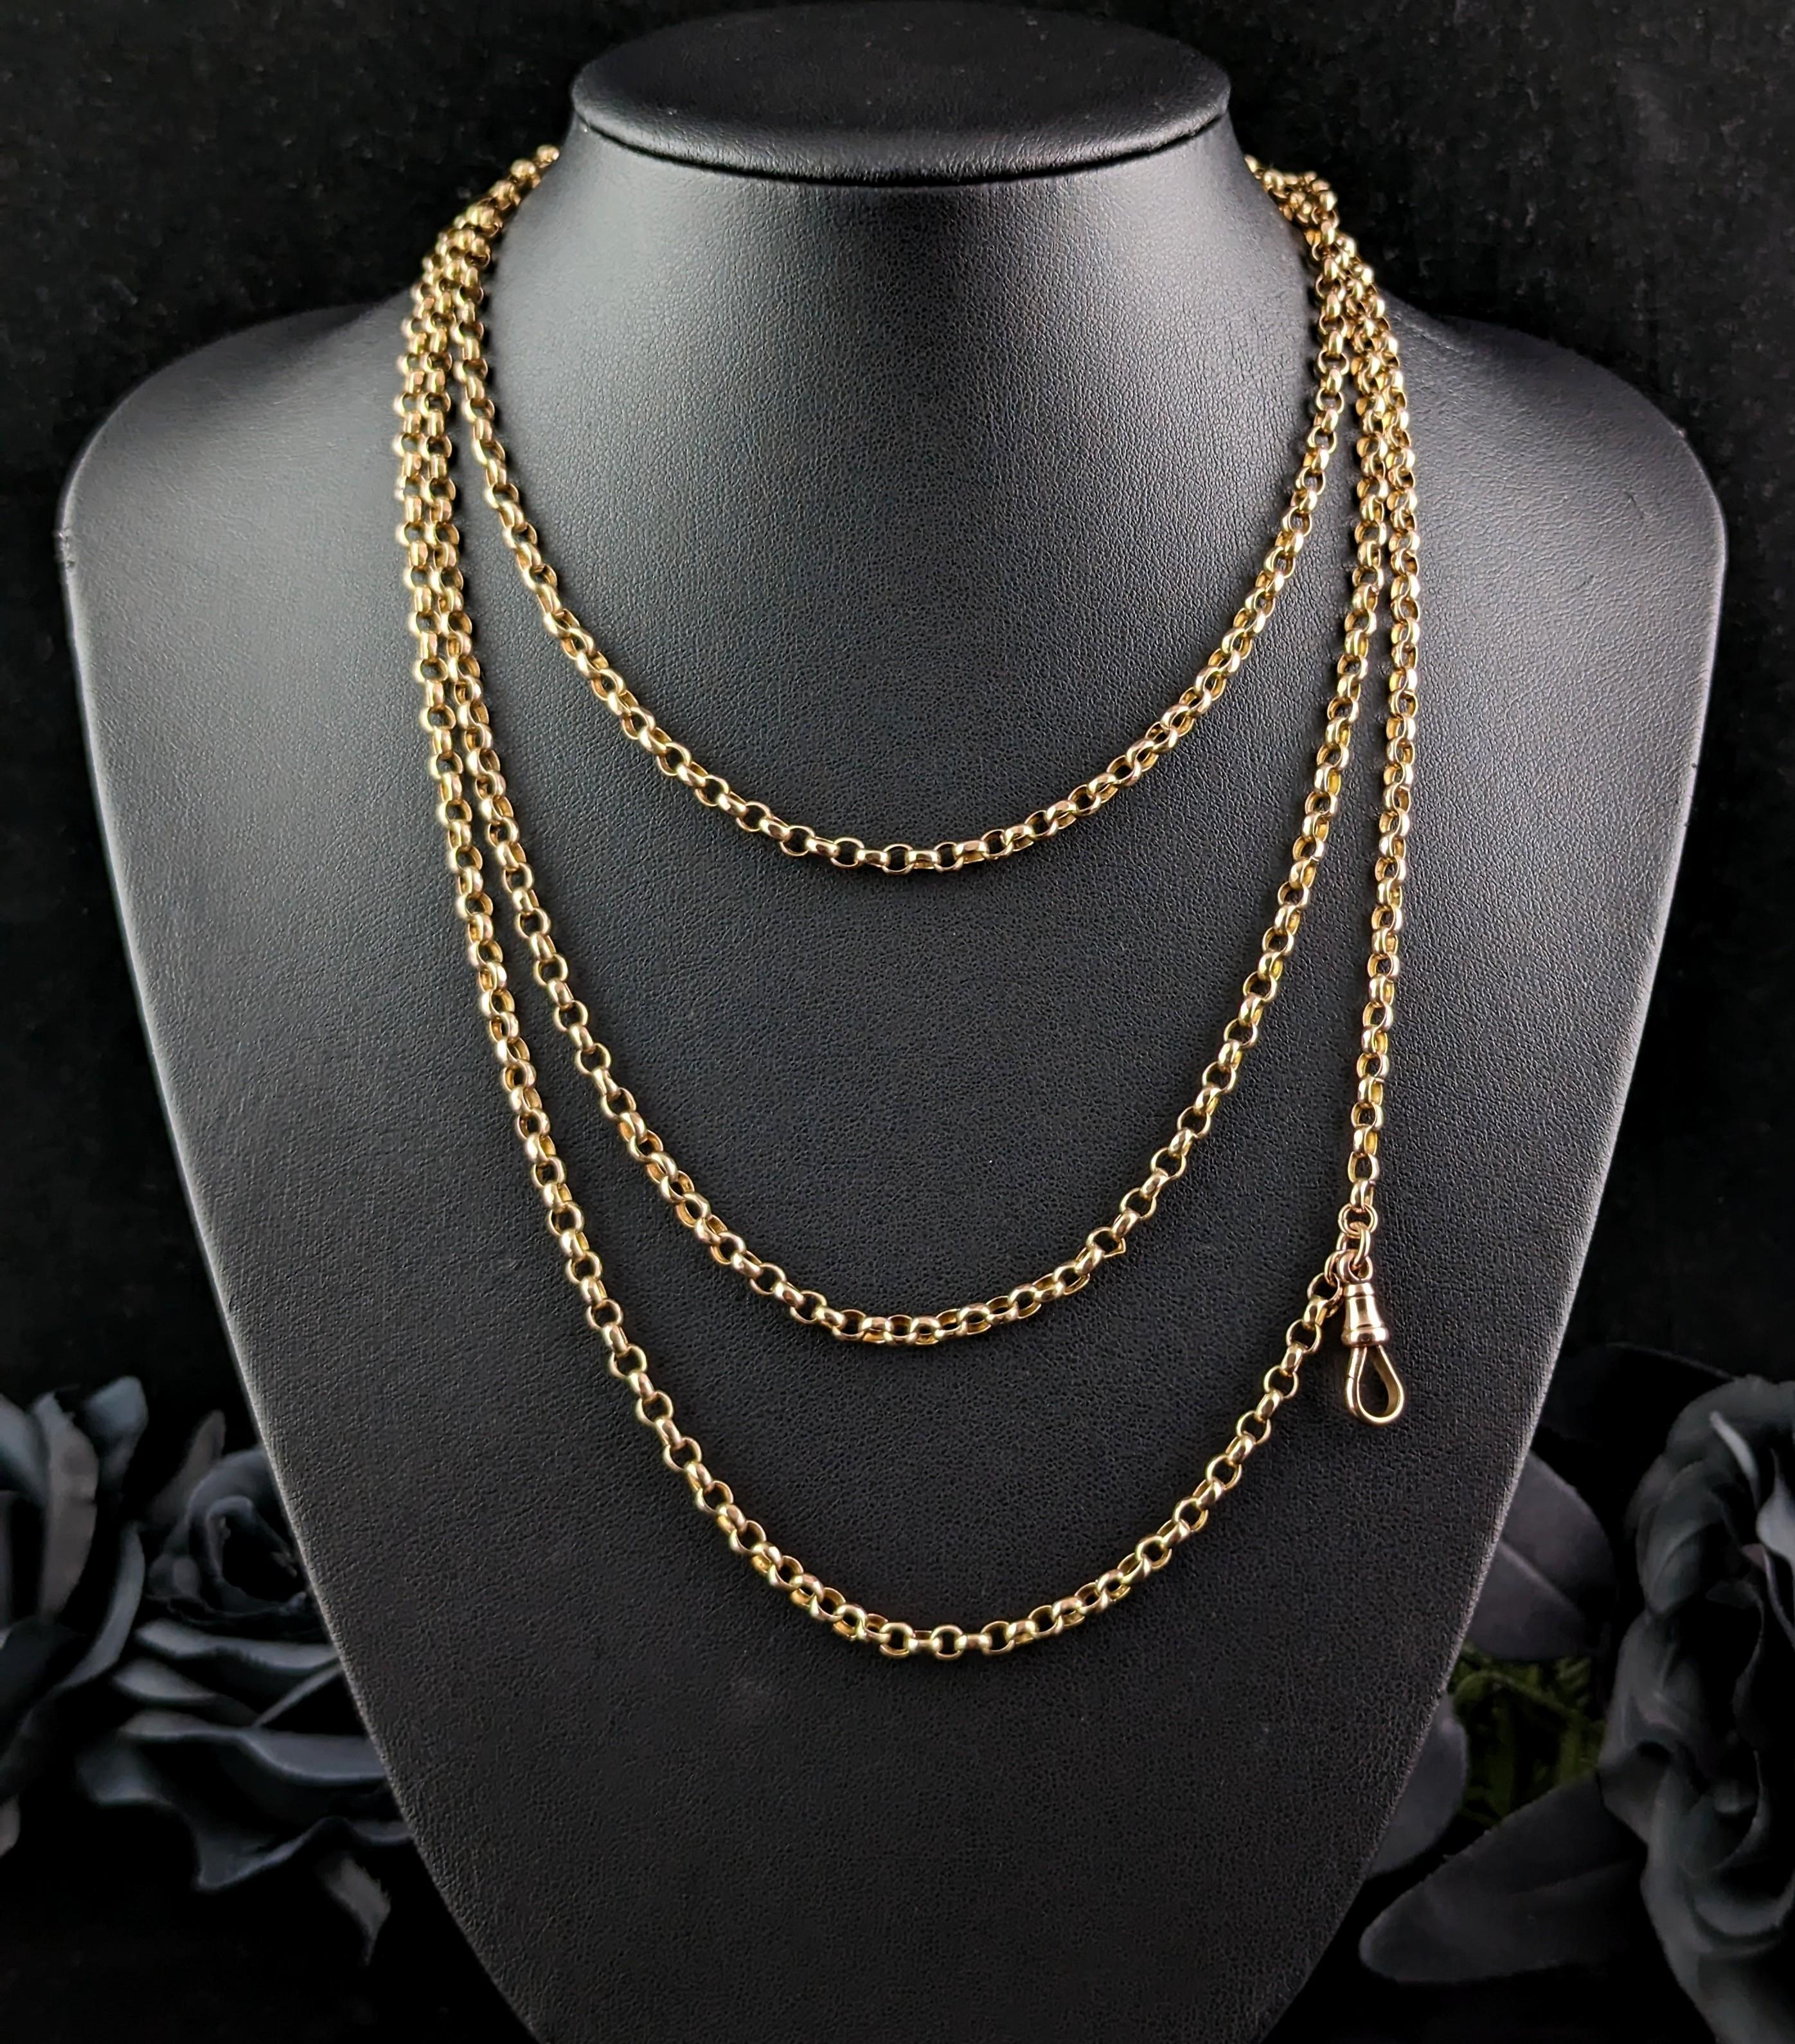 You can't go wrong with an antique gold long chain necklace, they are so versatile, timeless and beautiful.

We love a good longuard chain here, such a wearable piece of jewellery and can be utilised in many ways, these are truly the staple for any